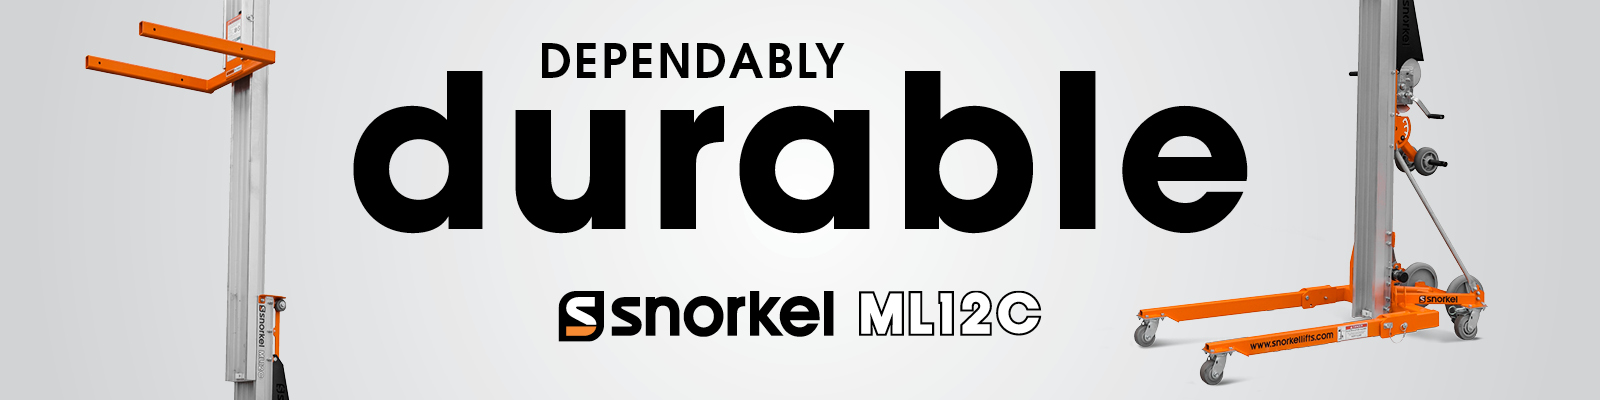 Dependably durable - Snorkel ML12C construction material lift